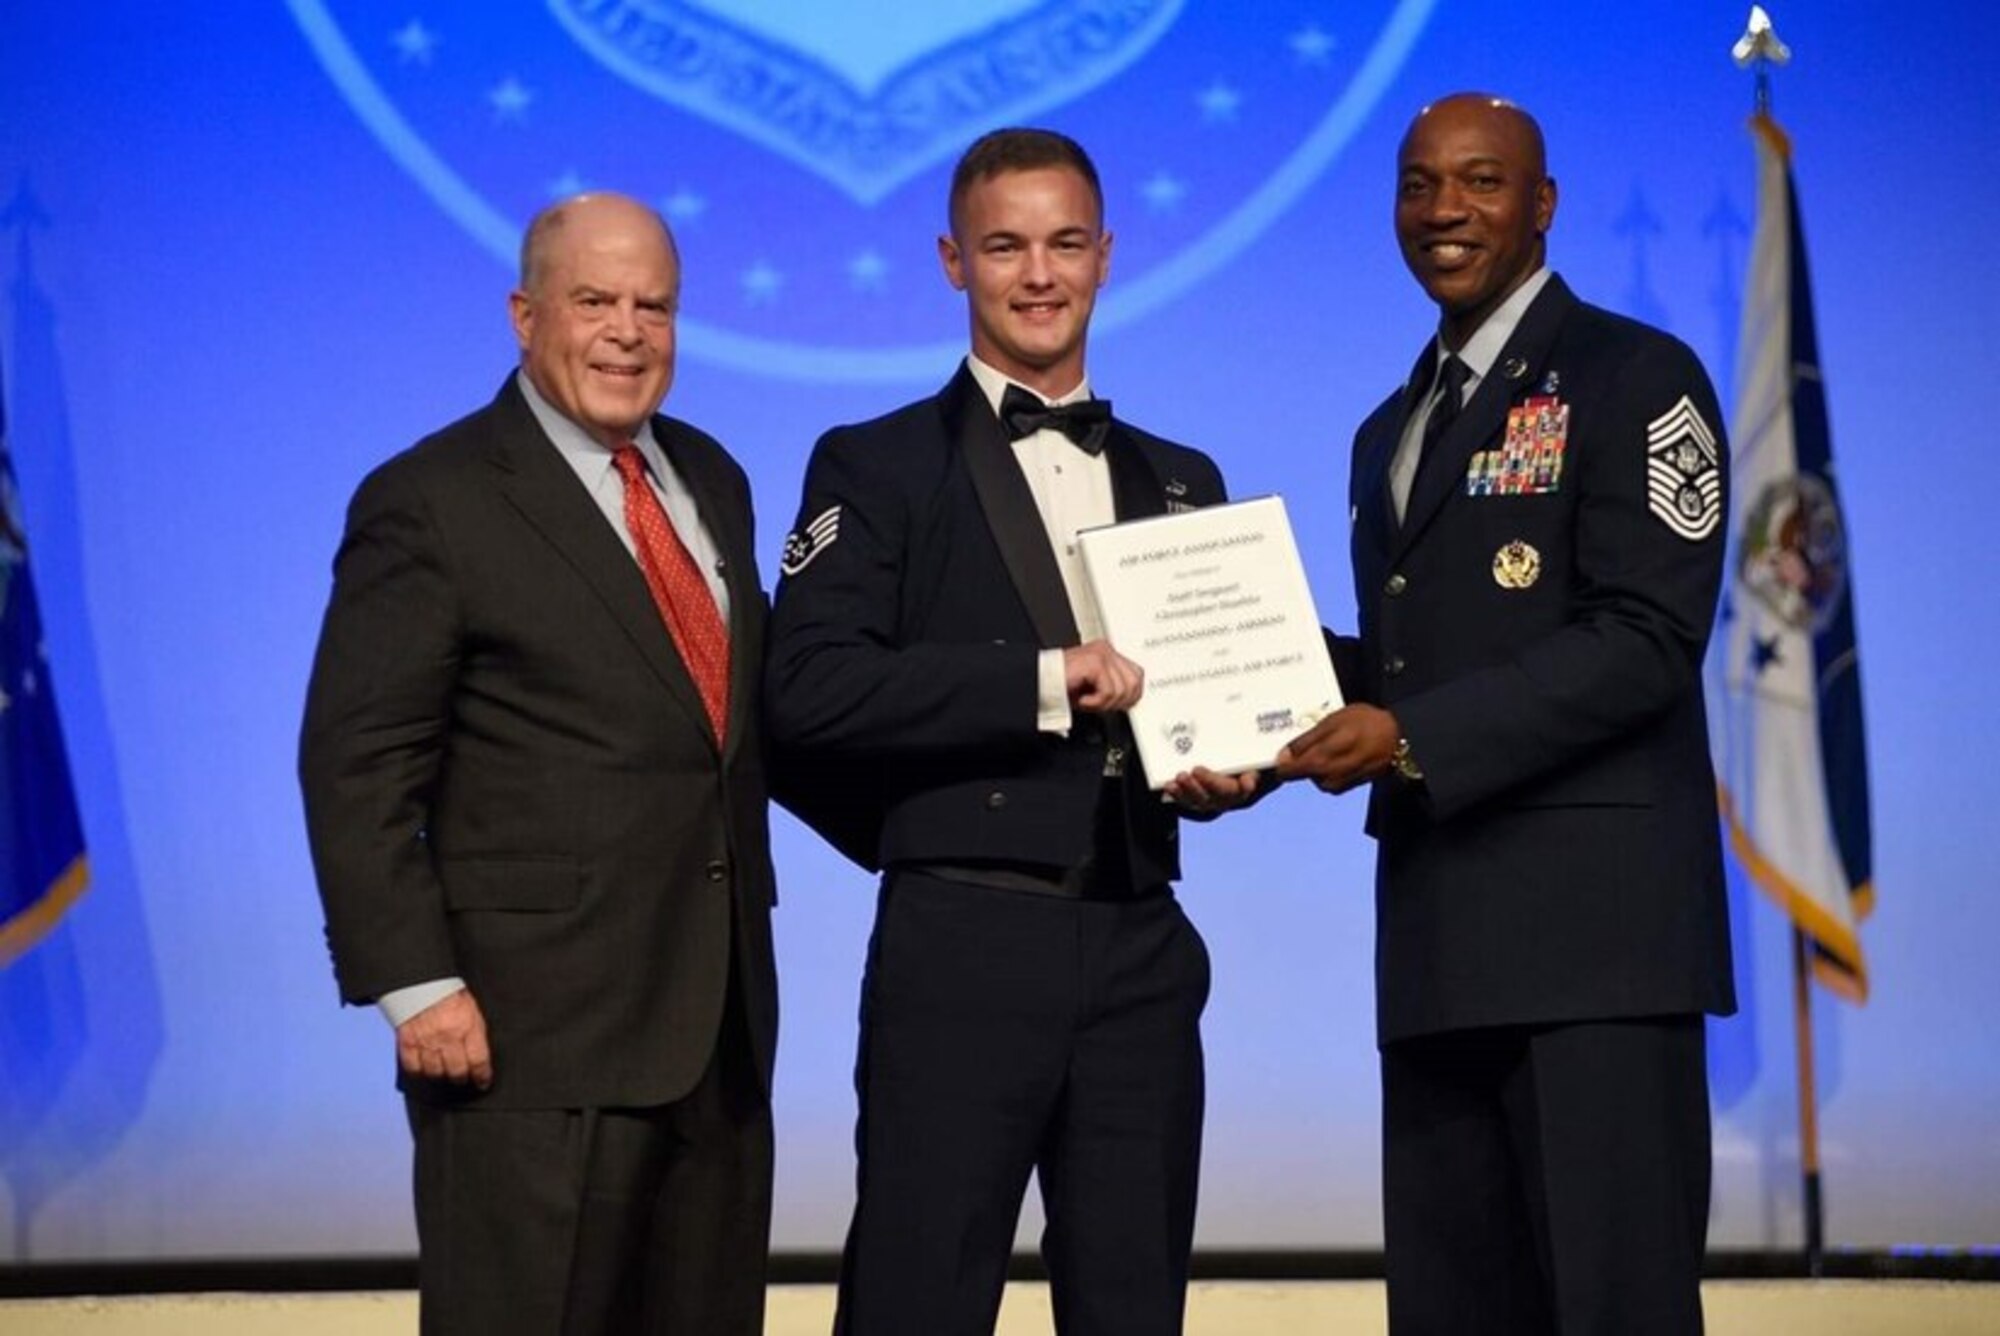 An Air Force Staff Sergeant poses for a photo with two other men. He holds a certificate and smiles.